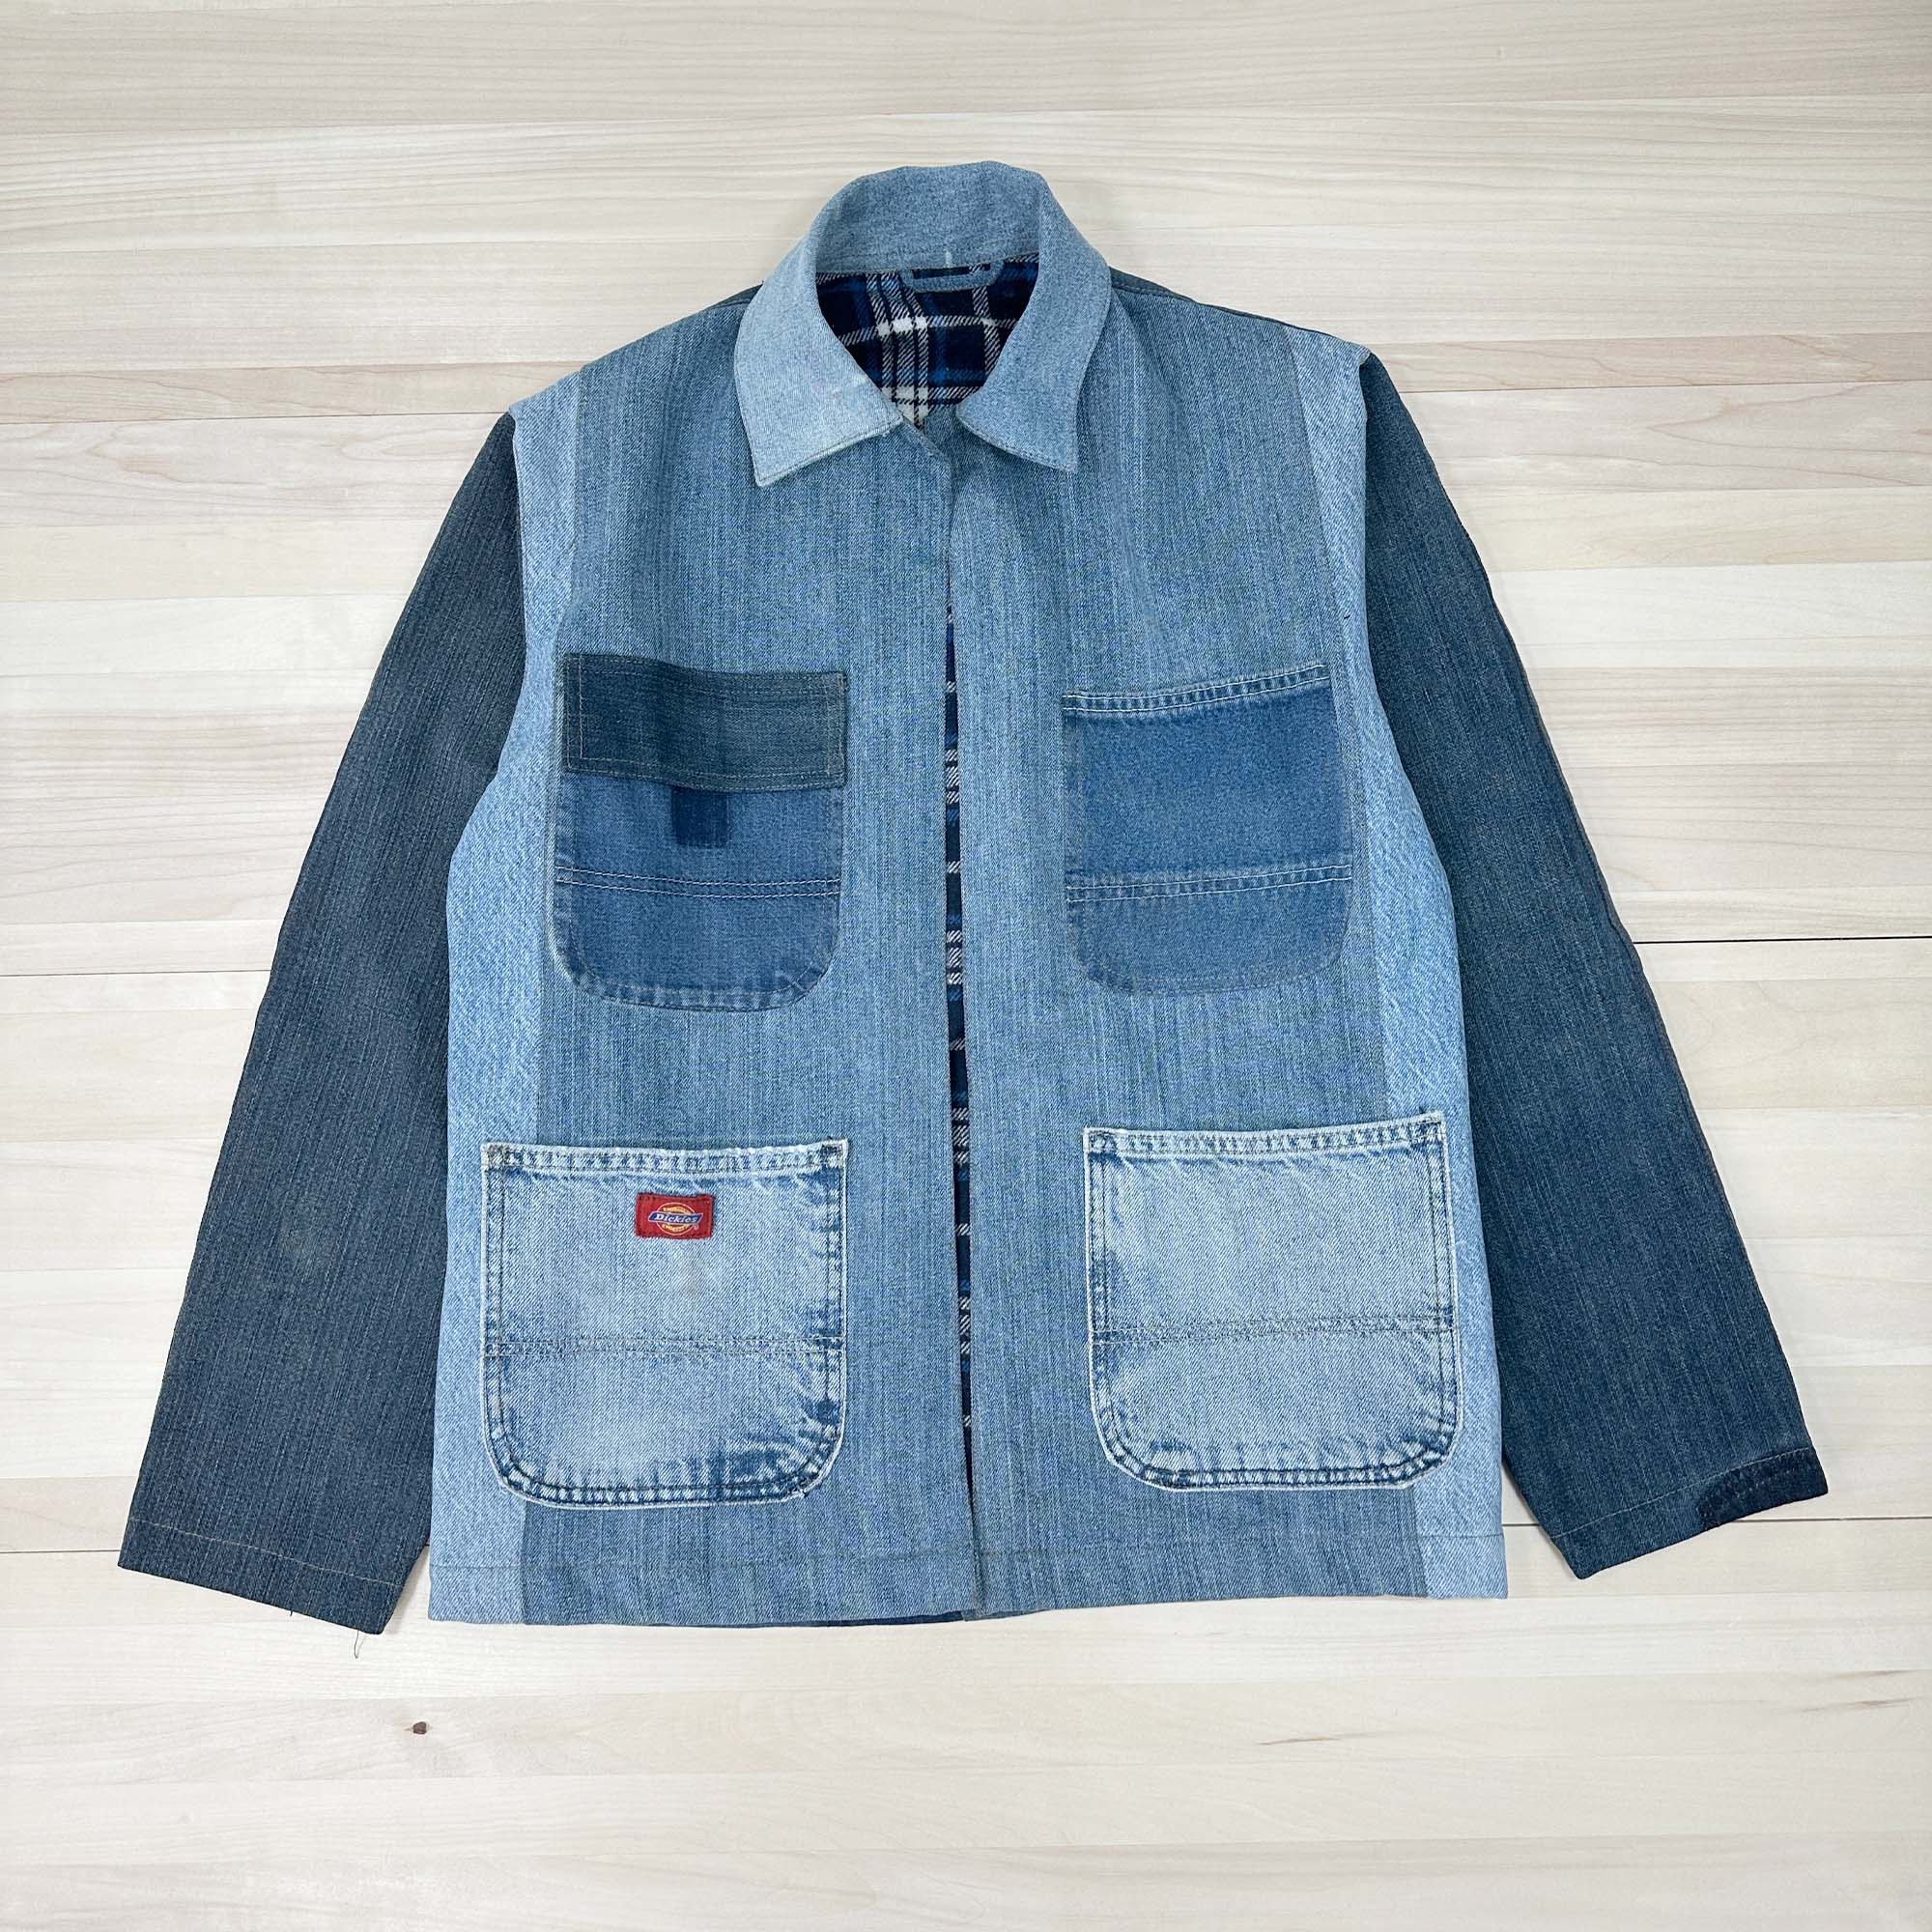 Chore Coat Made From Recycled Dickies Work Jeans - Small / Medium